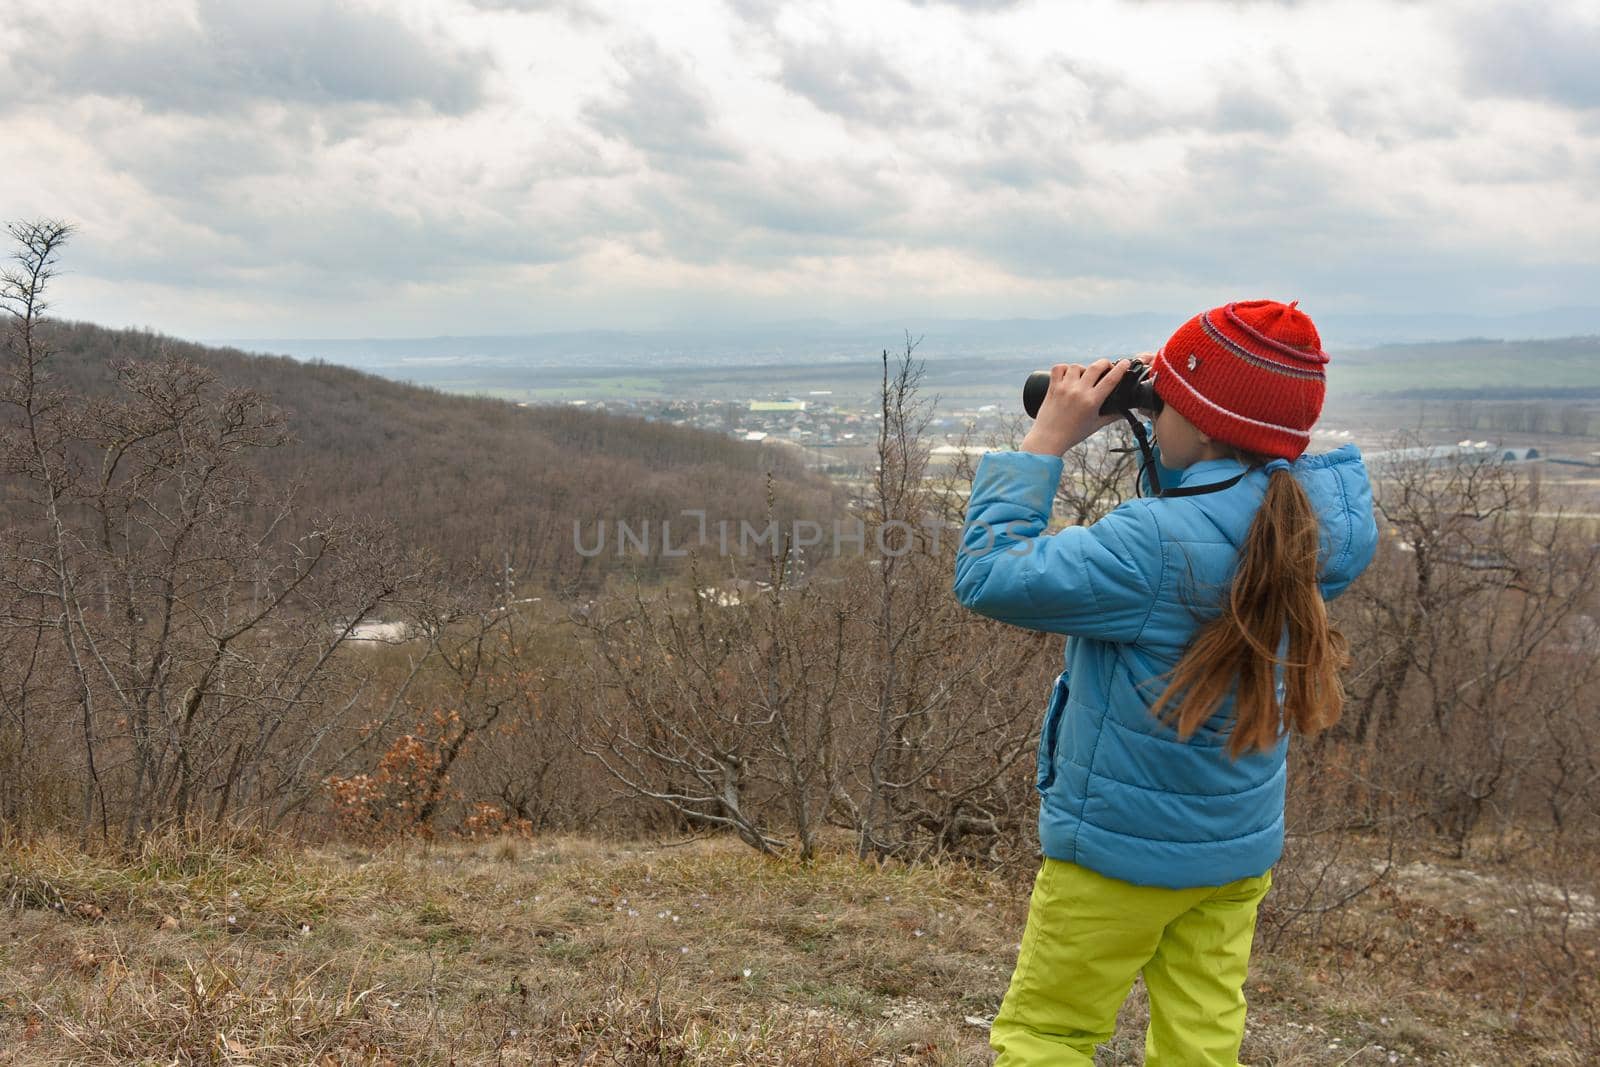 A girl examines a mountain landscape through binoculars, view from the back by Madhourse